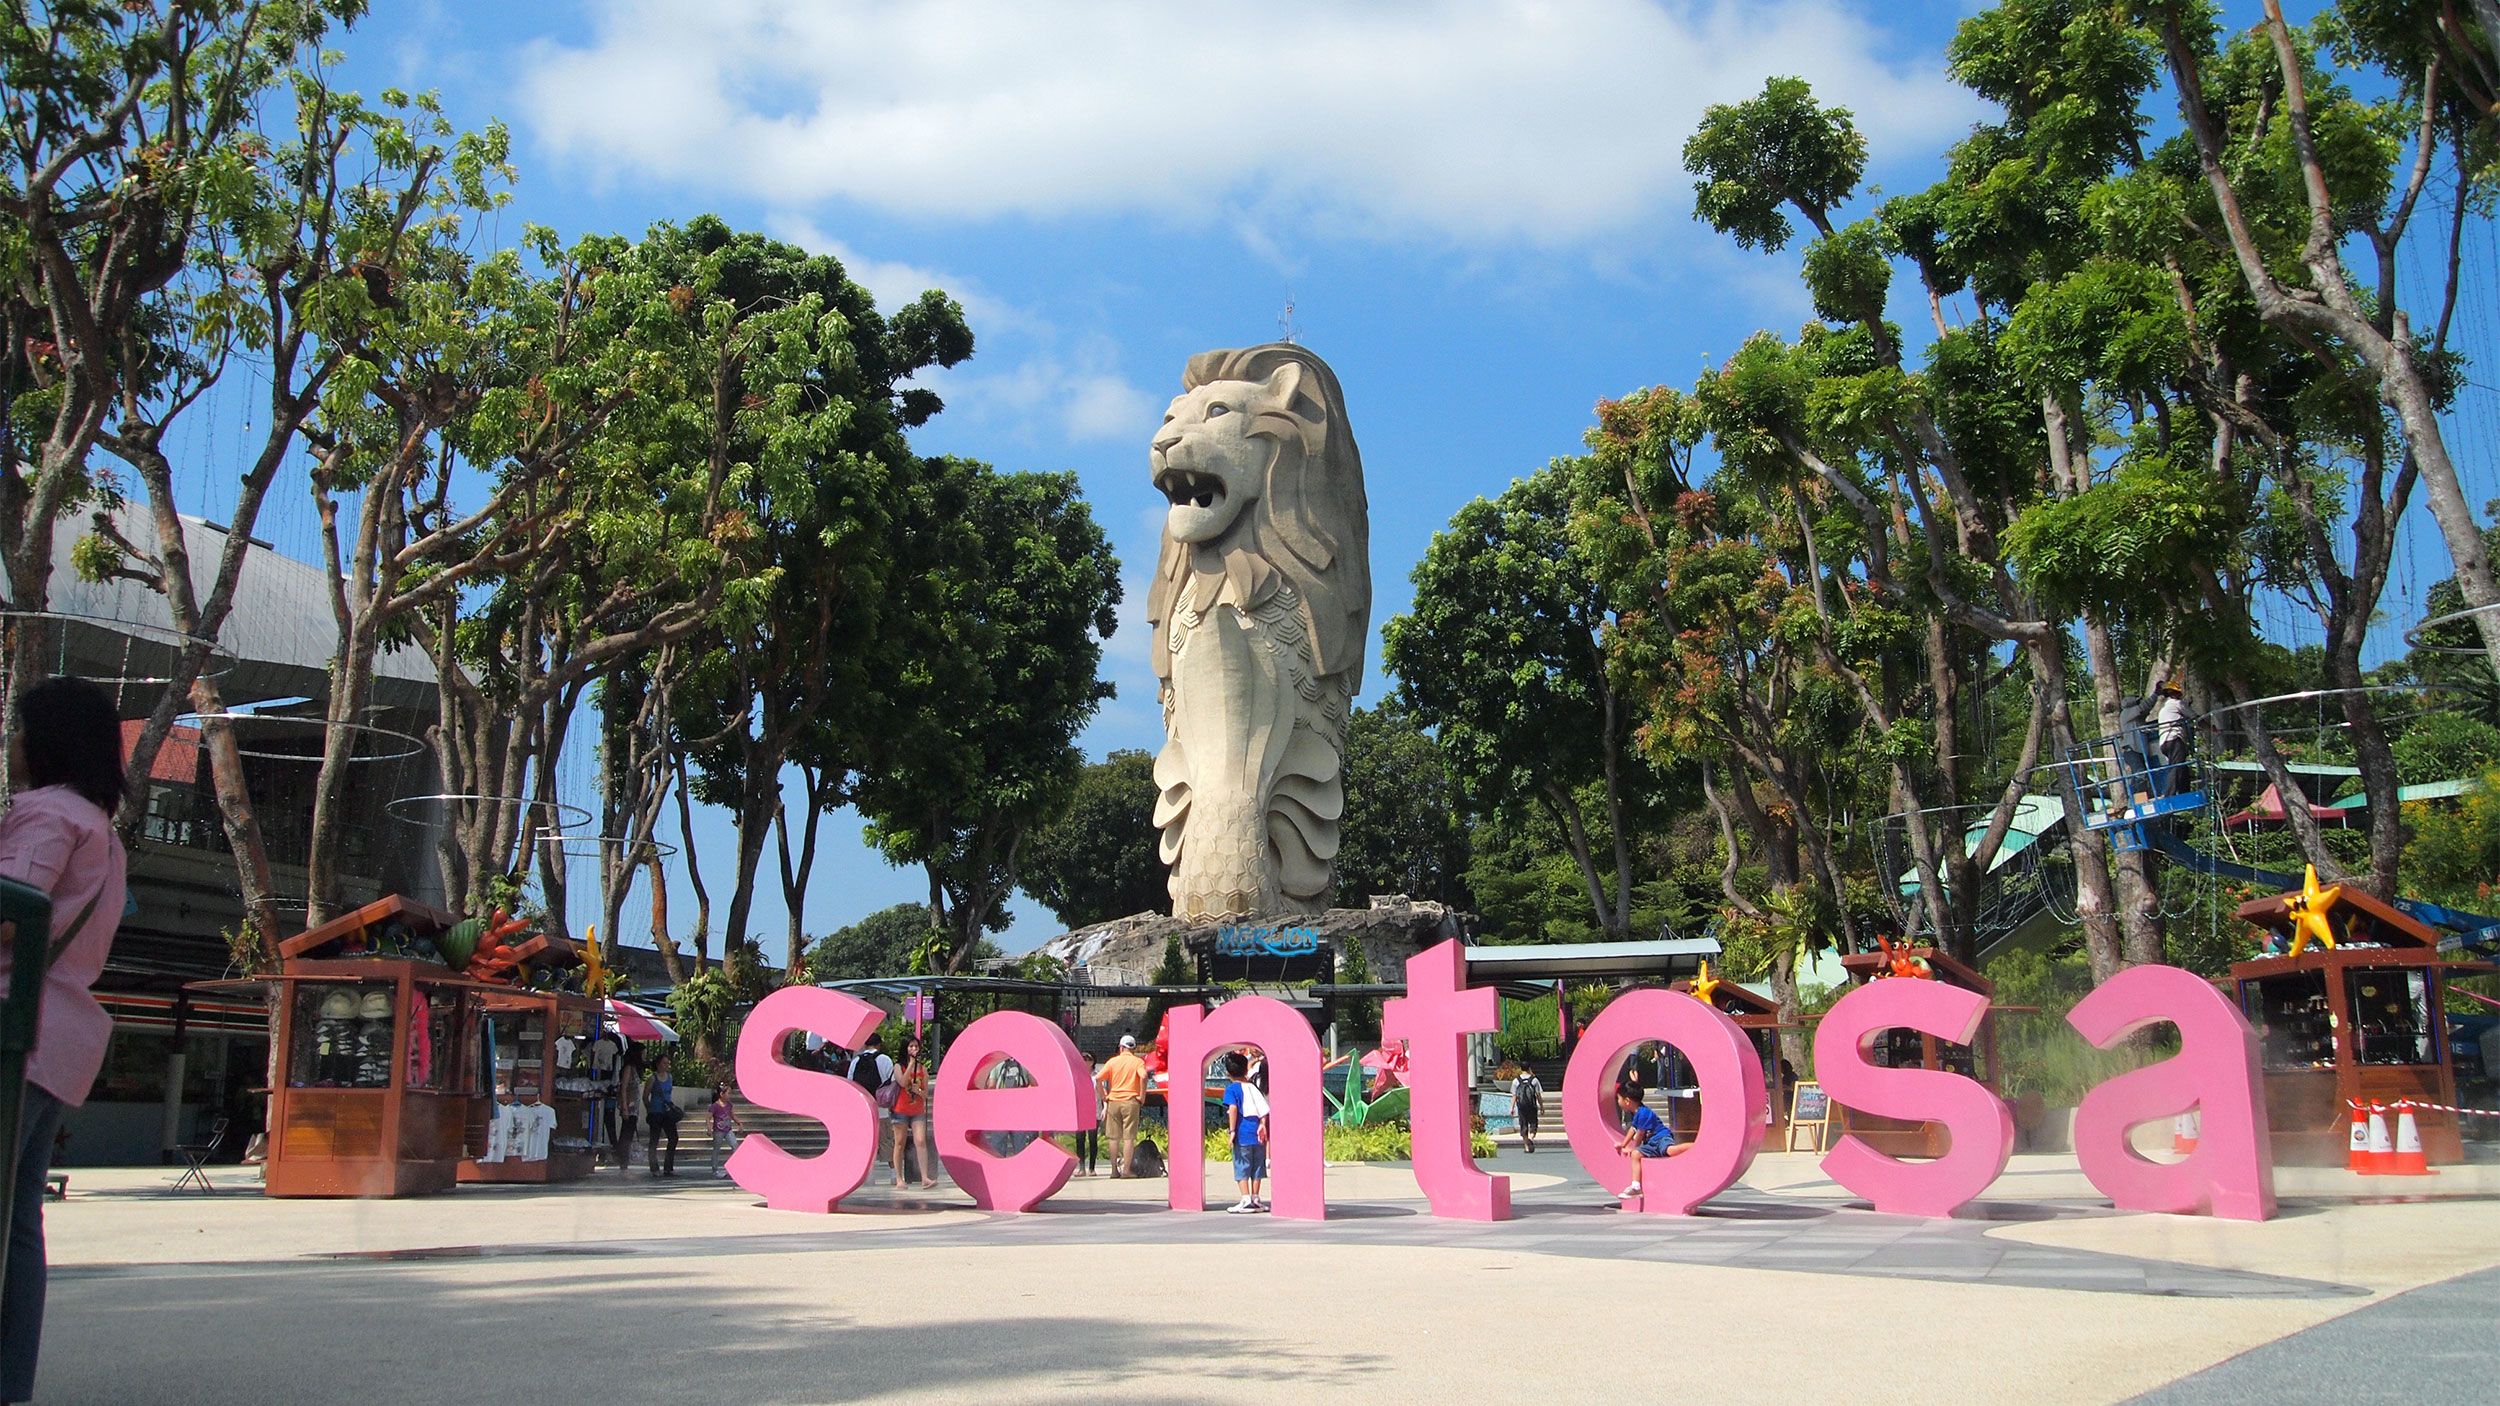 <strong>Island times:</strong> Rural Pulau Blakang Mati was renamed Sentosa by the Singaporean government in 1970 with the aim of turning it into a leisure spot for locals.